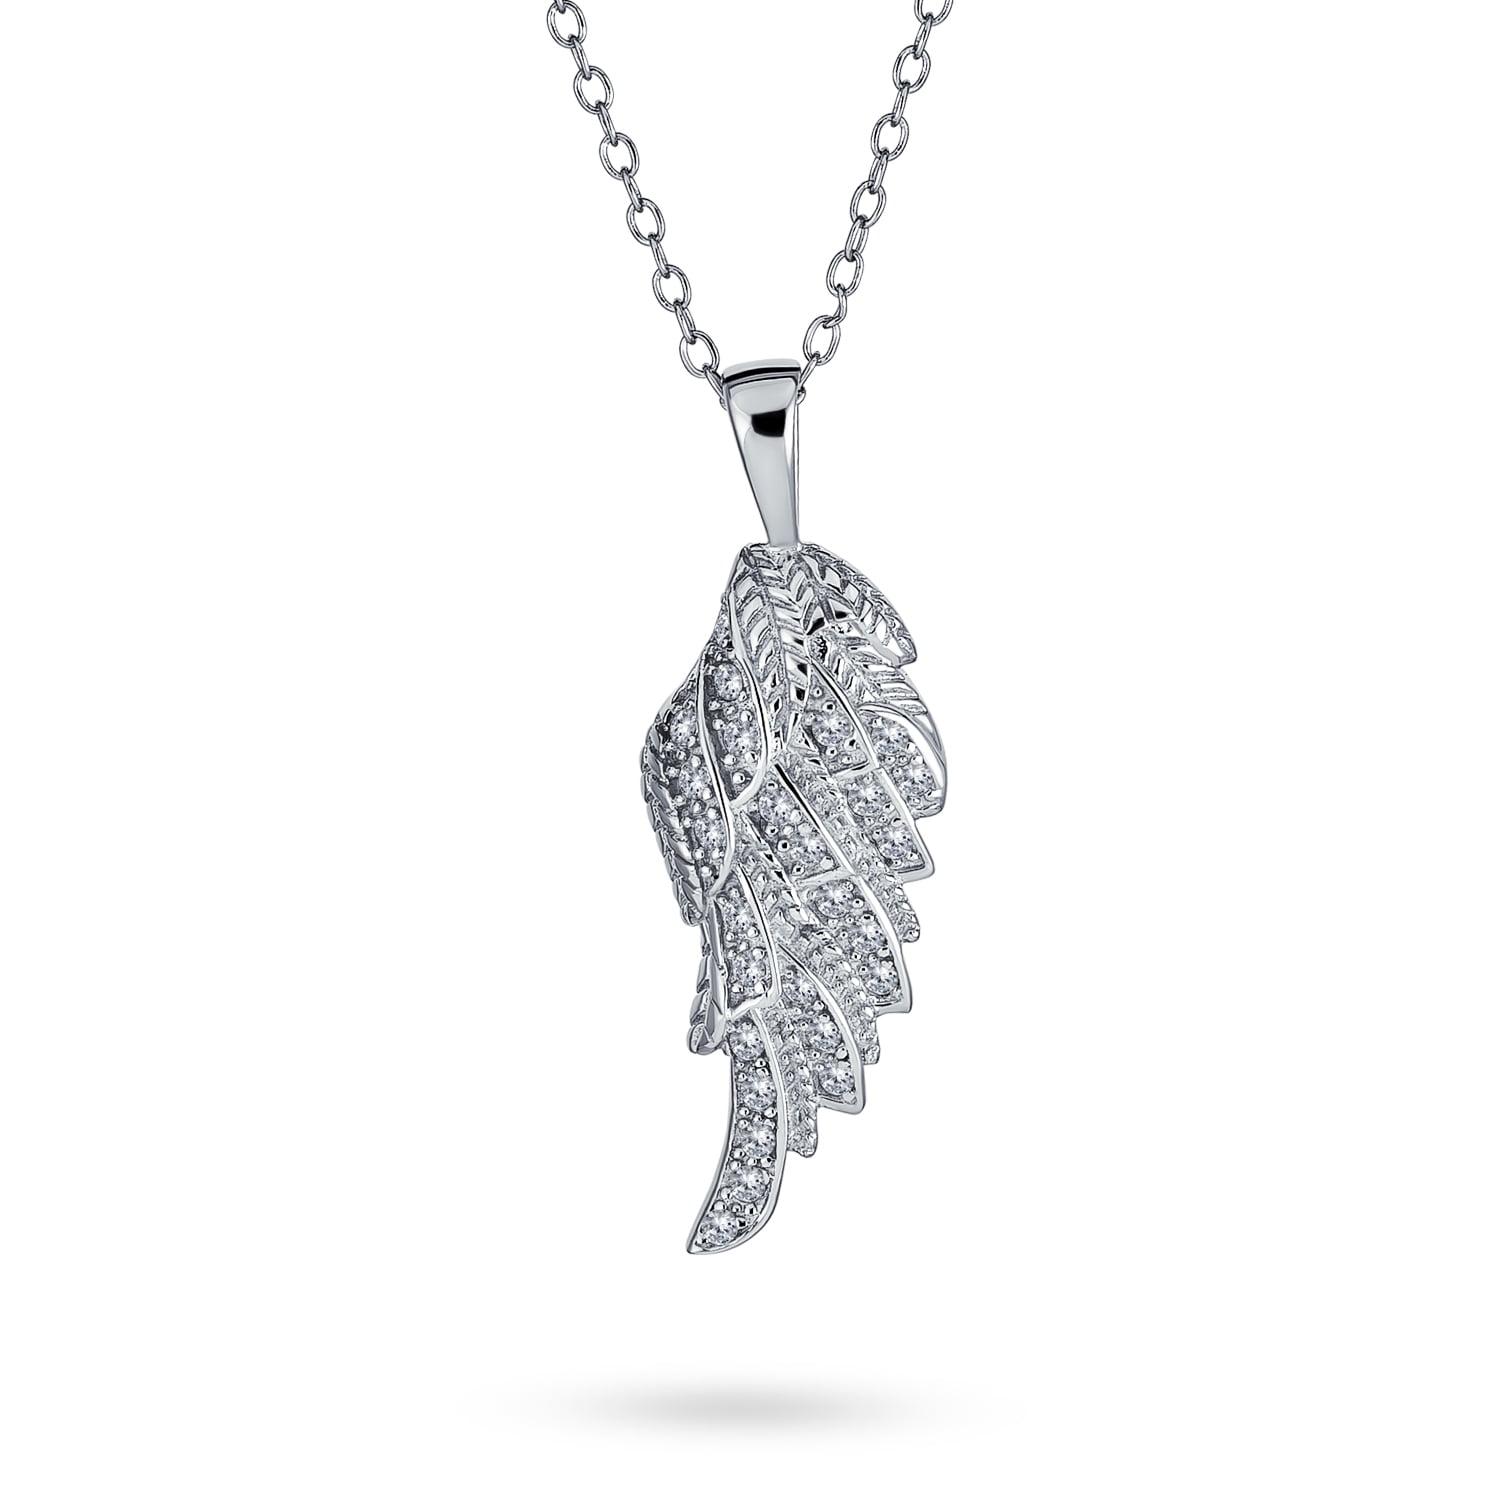 Real Solid 925 Sterling Silver Small Angel Fairy Wing Charm Pendant Gift